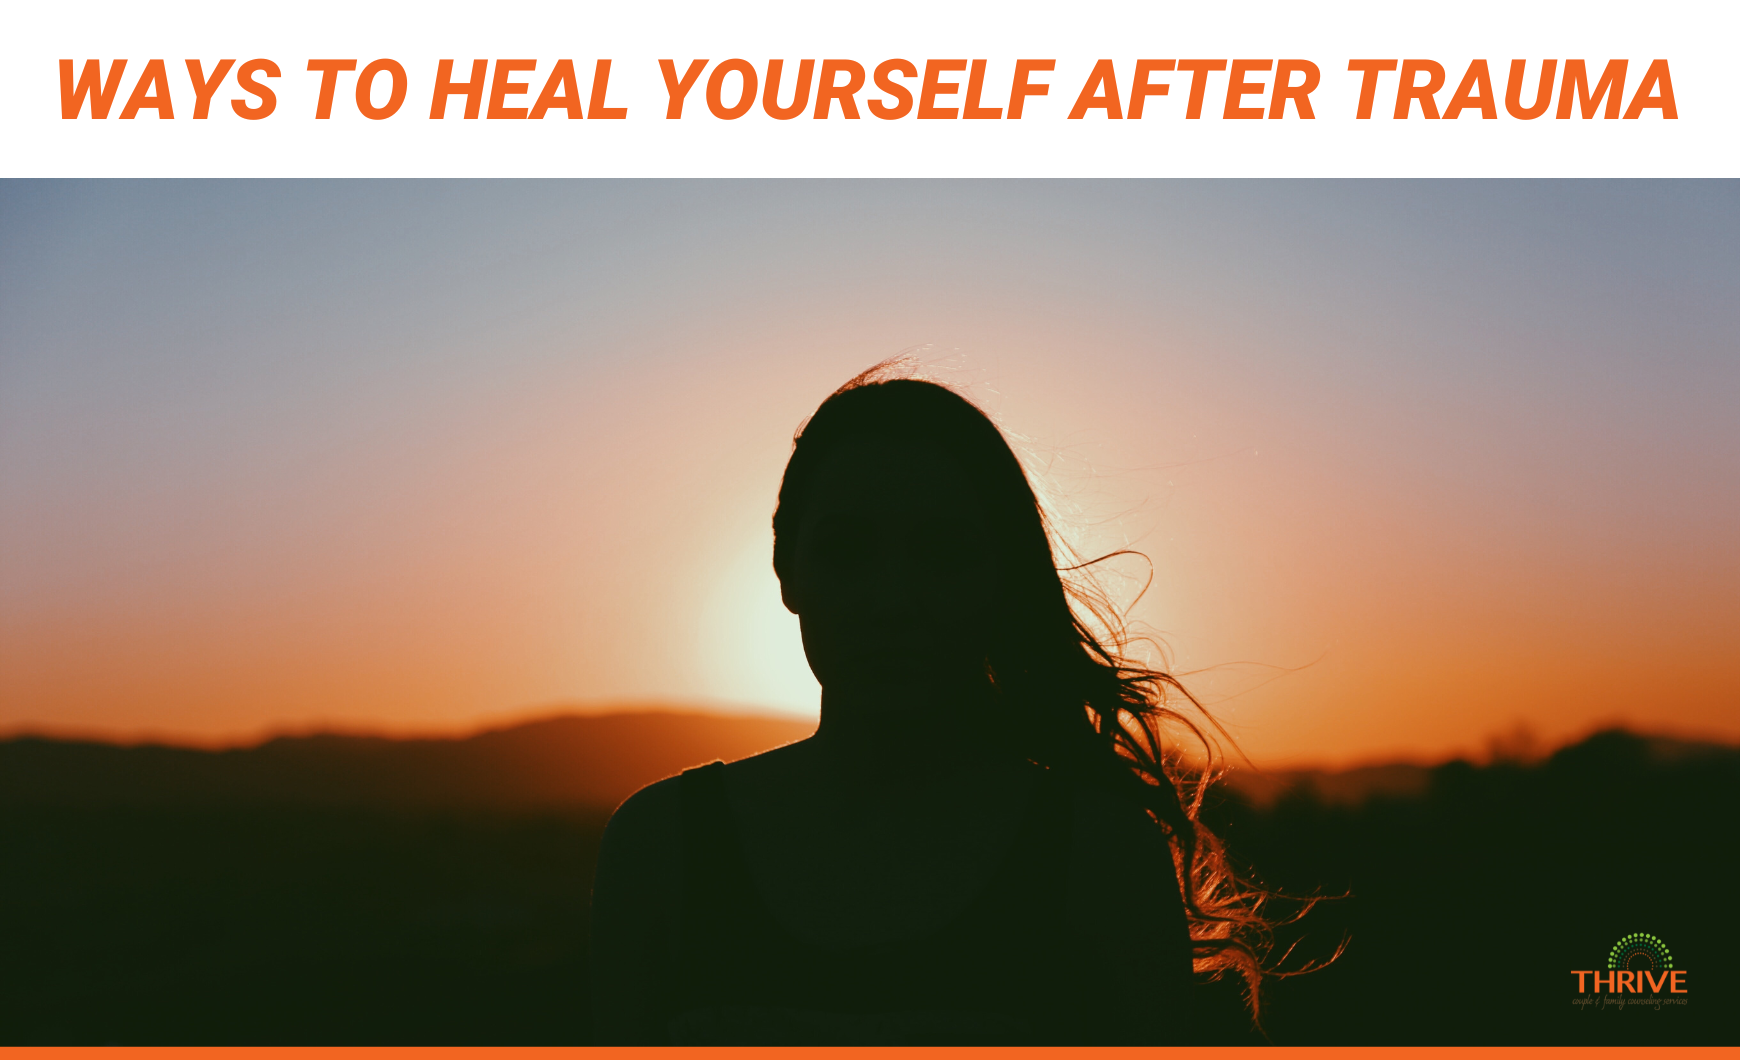 Dark orange text that reads "Ways to Heal Yourself After Trauma" above a stock photo of a silhouette of a woman facing a sunset.